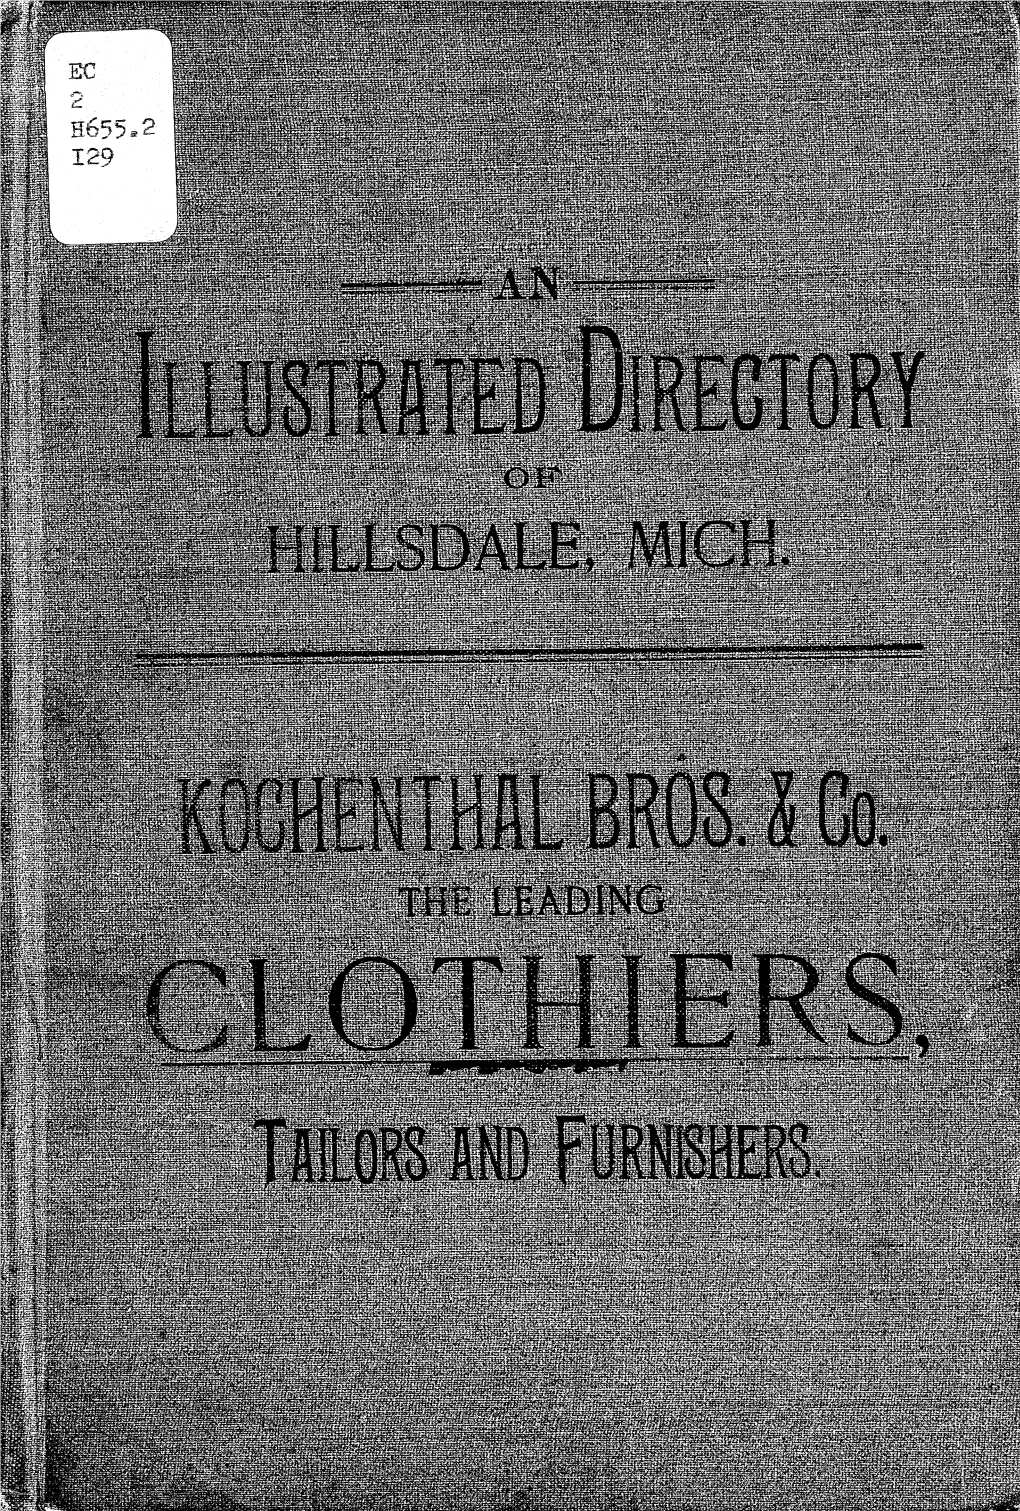 1894 Illustrated City Directory of Hillsdale, Michigan